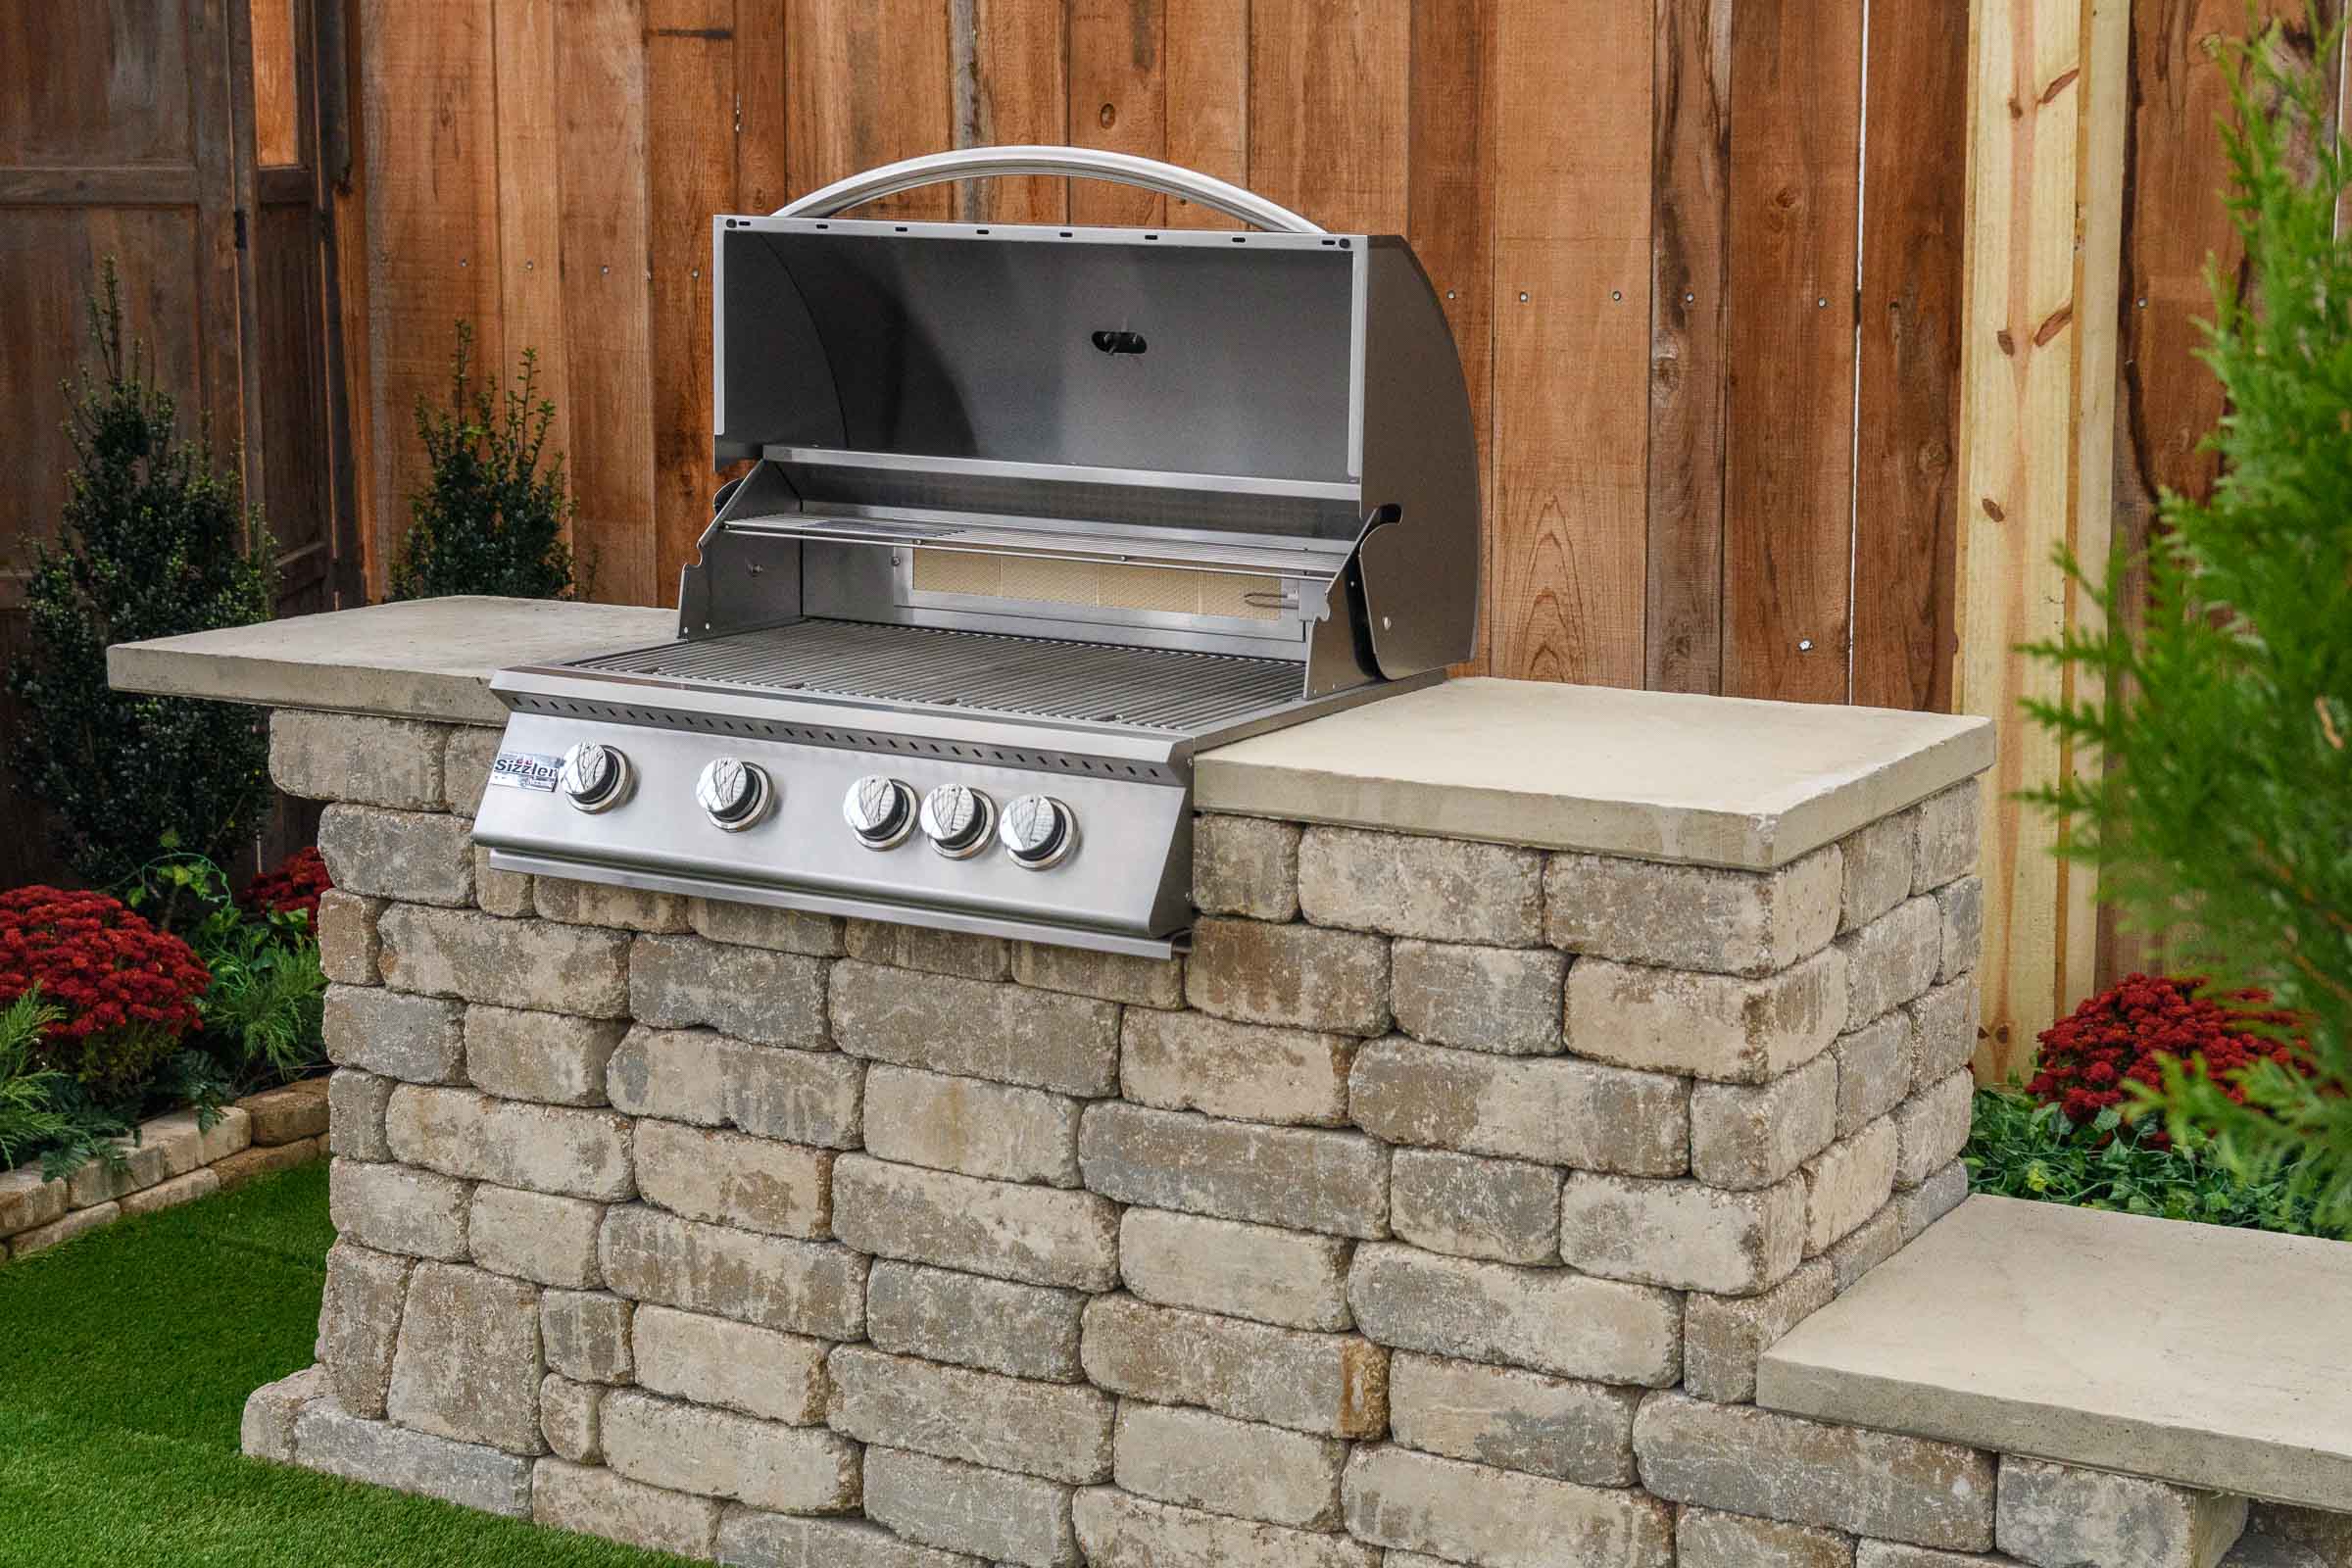 Willard Grill Station Jealousy, How To Build Grill Surround